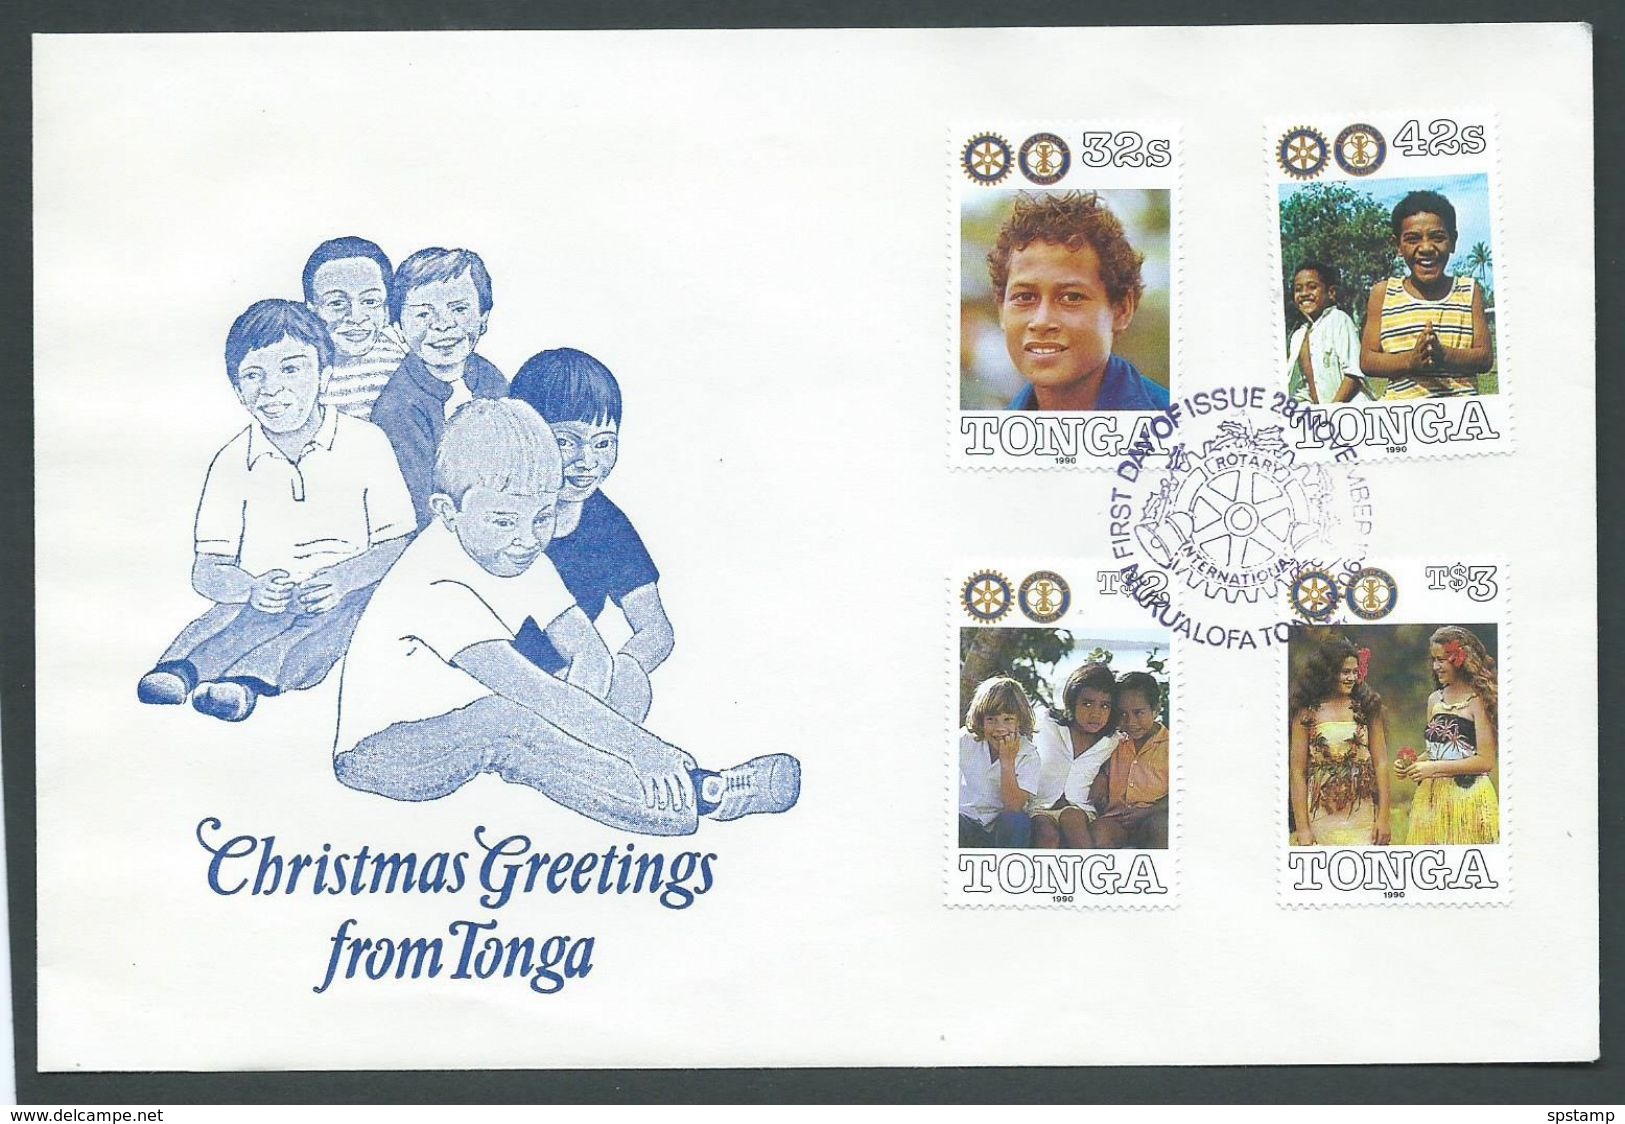 Tonga 1990 Rotary Issue Paste Up Proof Of Special FDI Postmark On Artist Board - Tonga (1970-...)